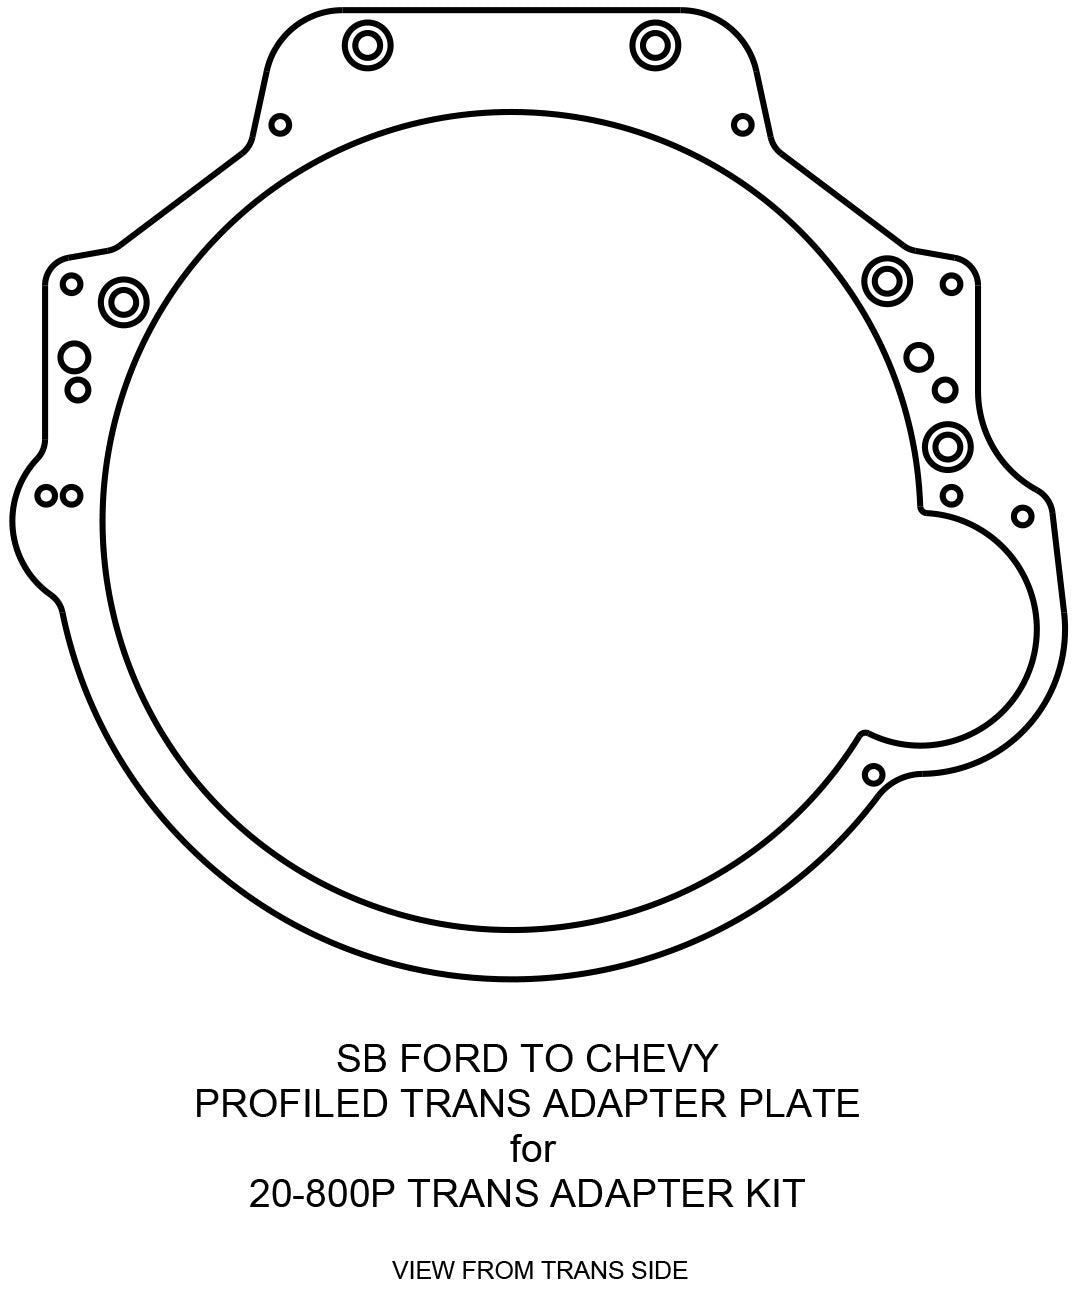 Transmission Adapter Plate - Profiled - Small Block Ford To Powerglide, 289,302,351C,351W Engines